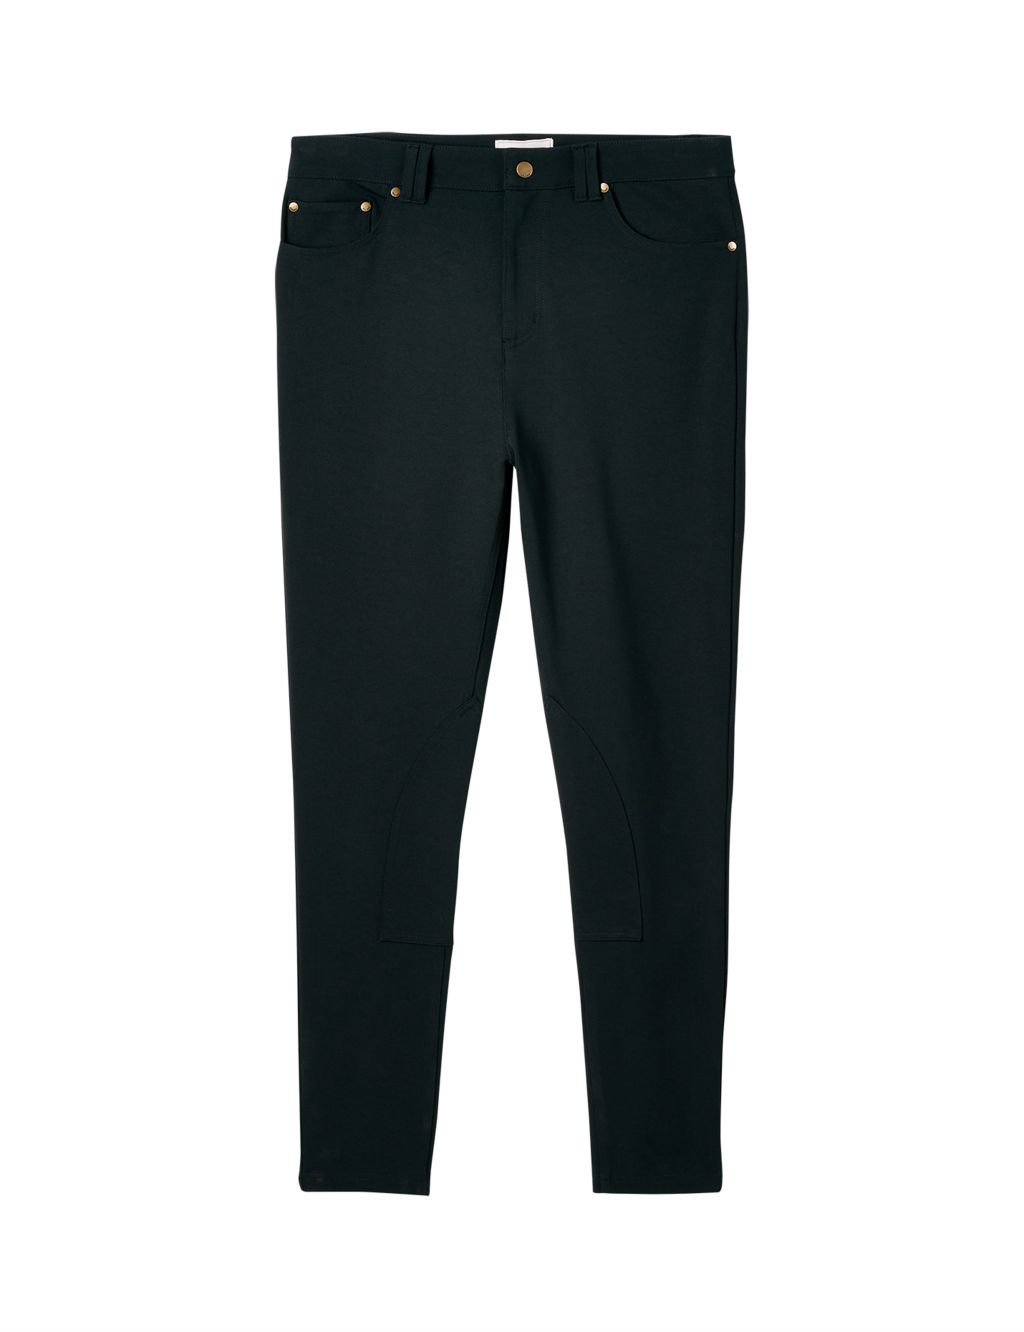 Jersey Slim Fit Trousers image 2